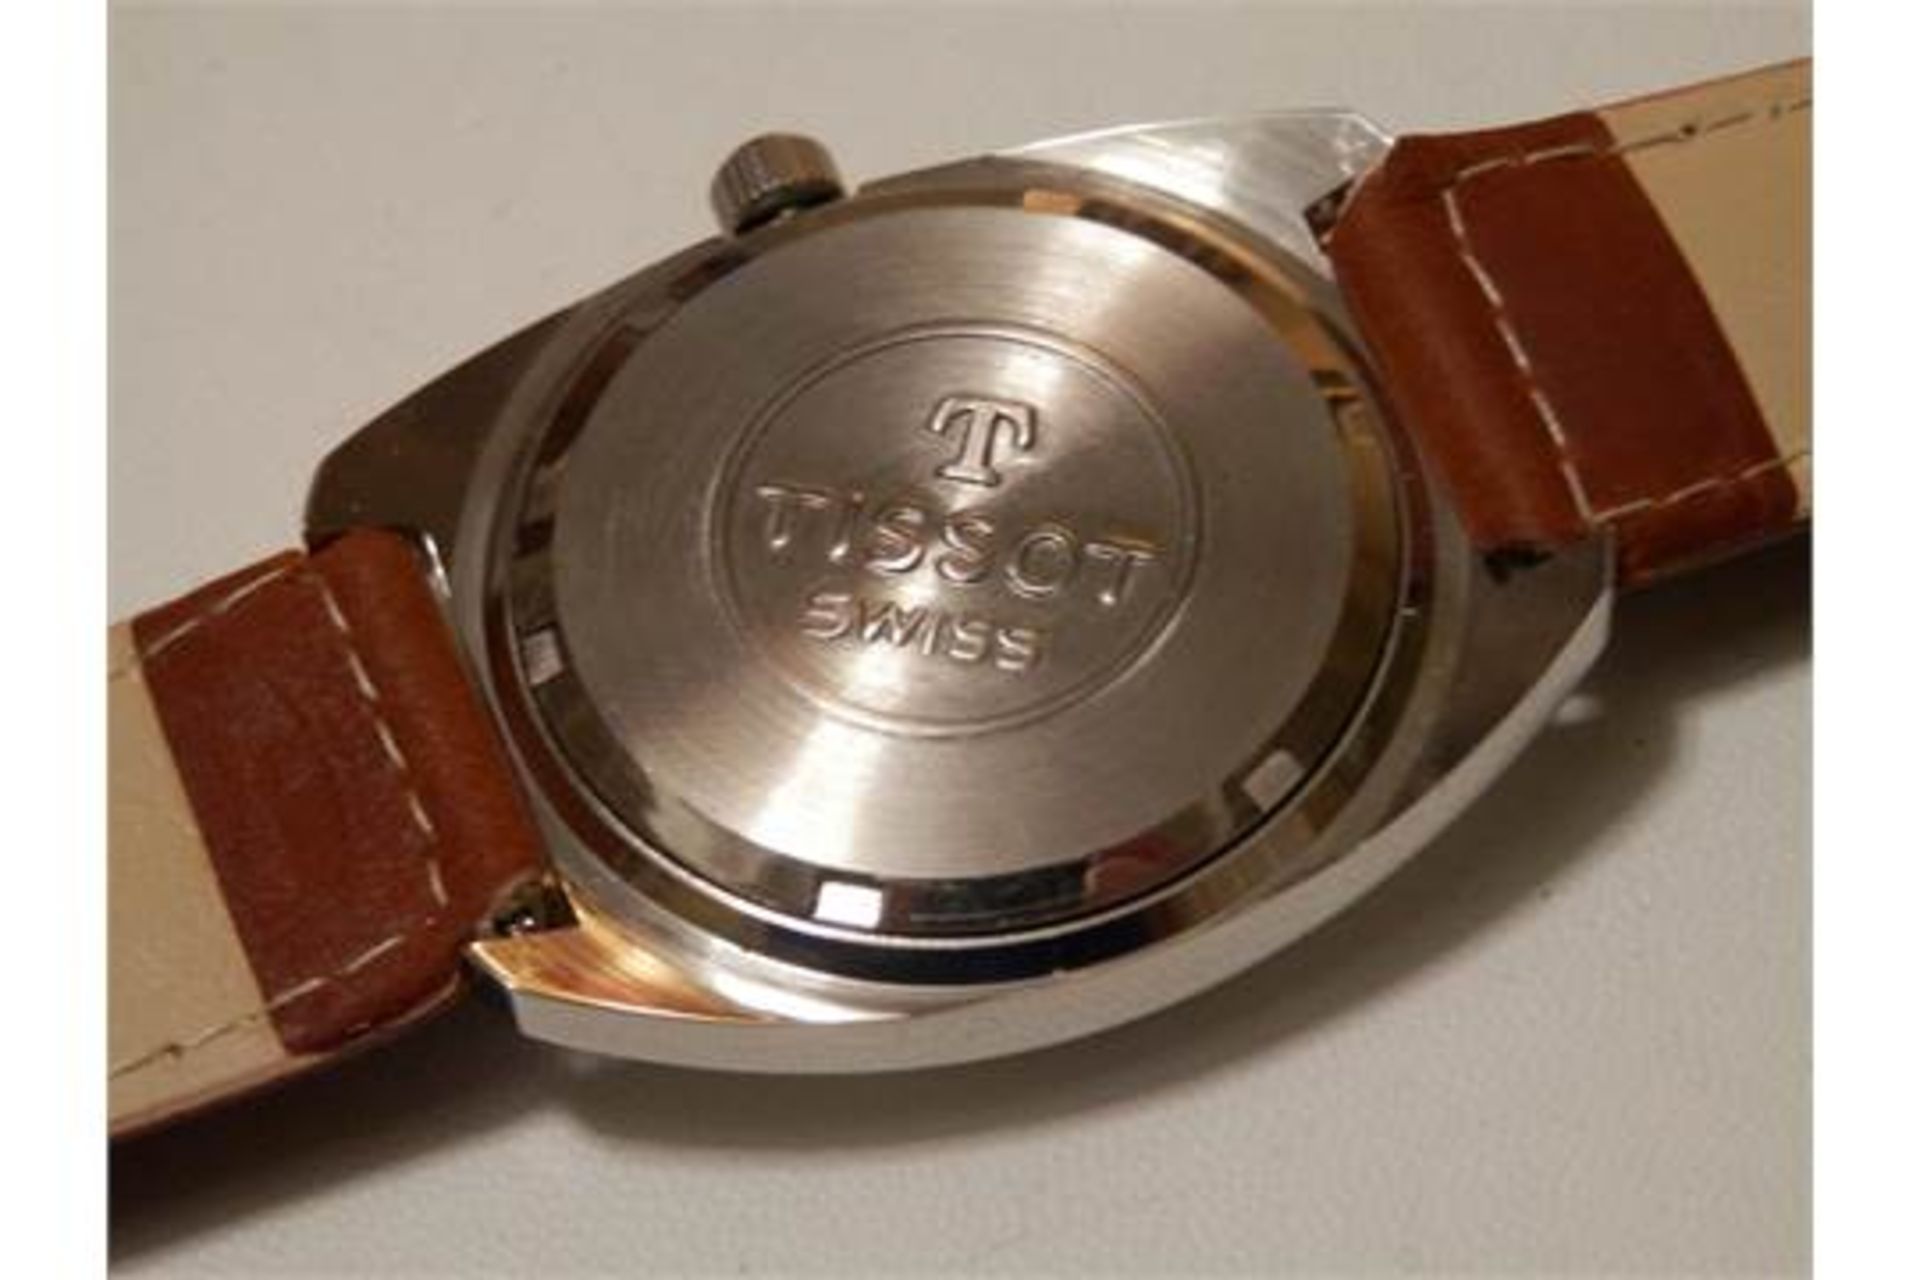 SUPERB GENTS TISSOT SEASTAR, POSSIBLY NEW/OLD STOCK 1970S 17 JEWEL SWISS WATCH (1 of 3 available) - Image 5 of 10